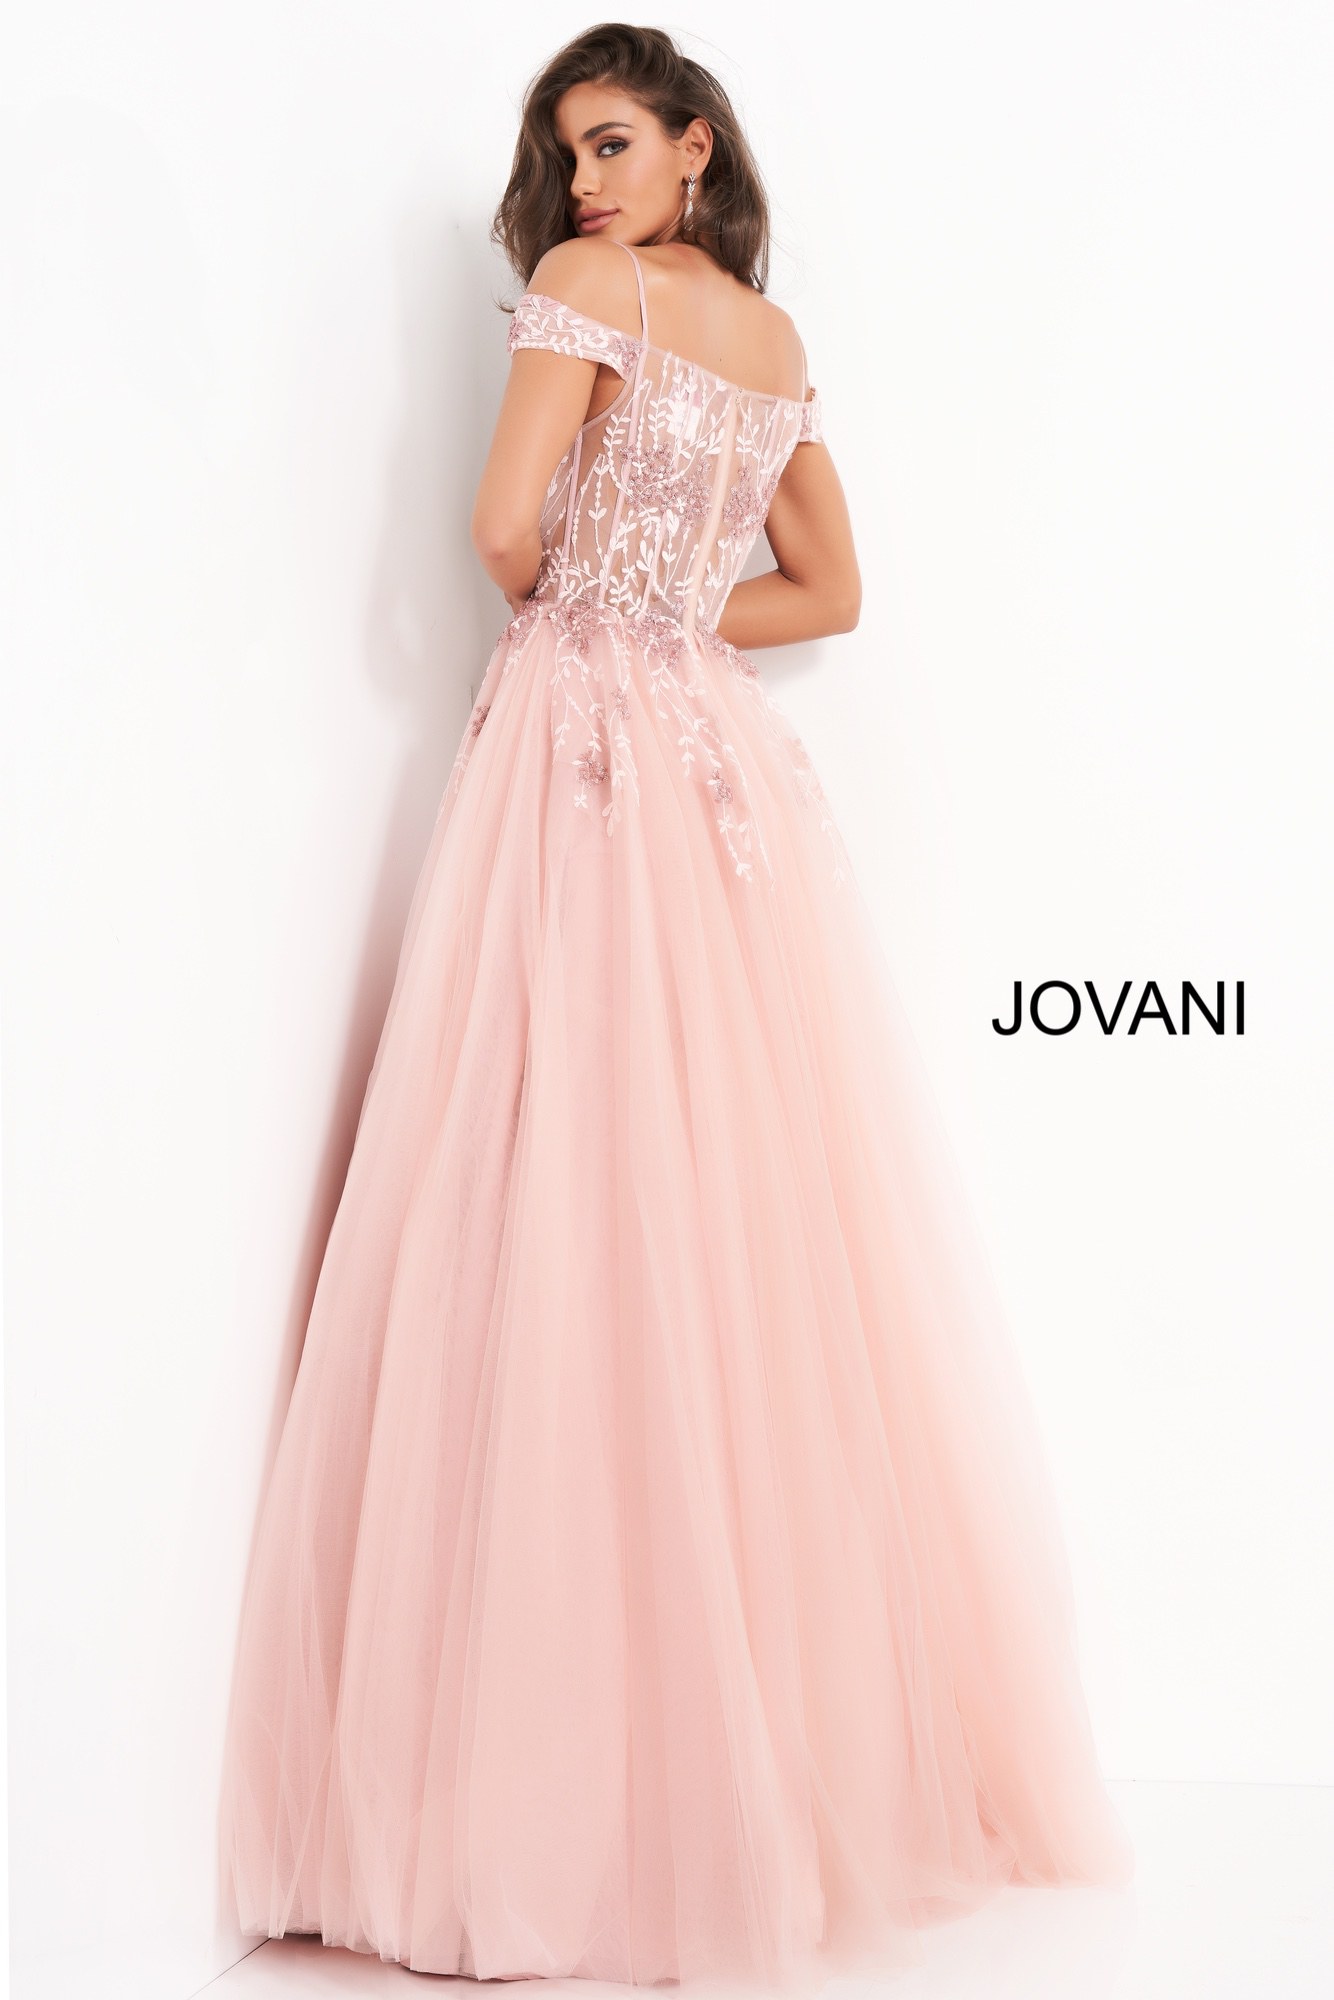 Jovani 02022 | Blush Embroidered Sheer Bodice Evening Gown